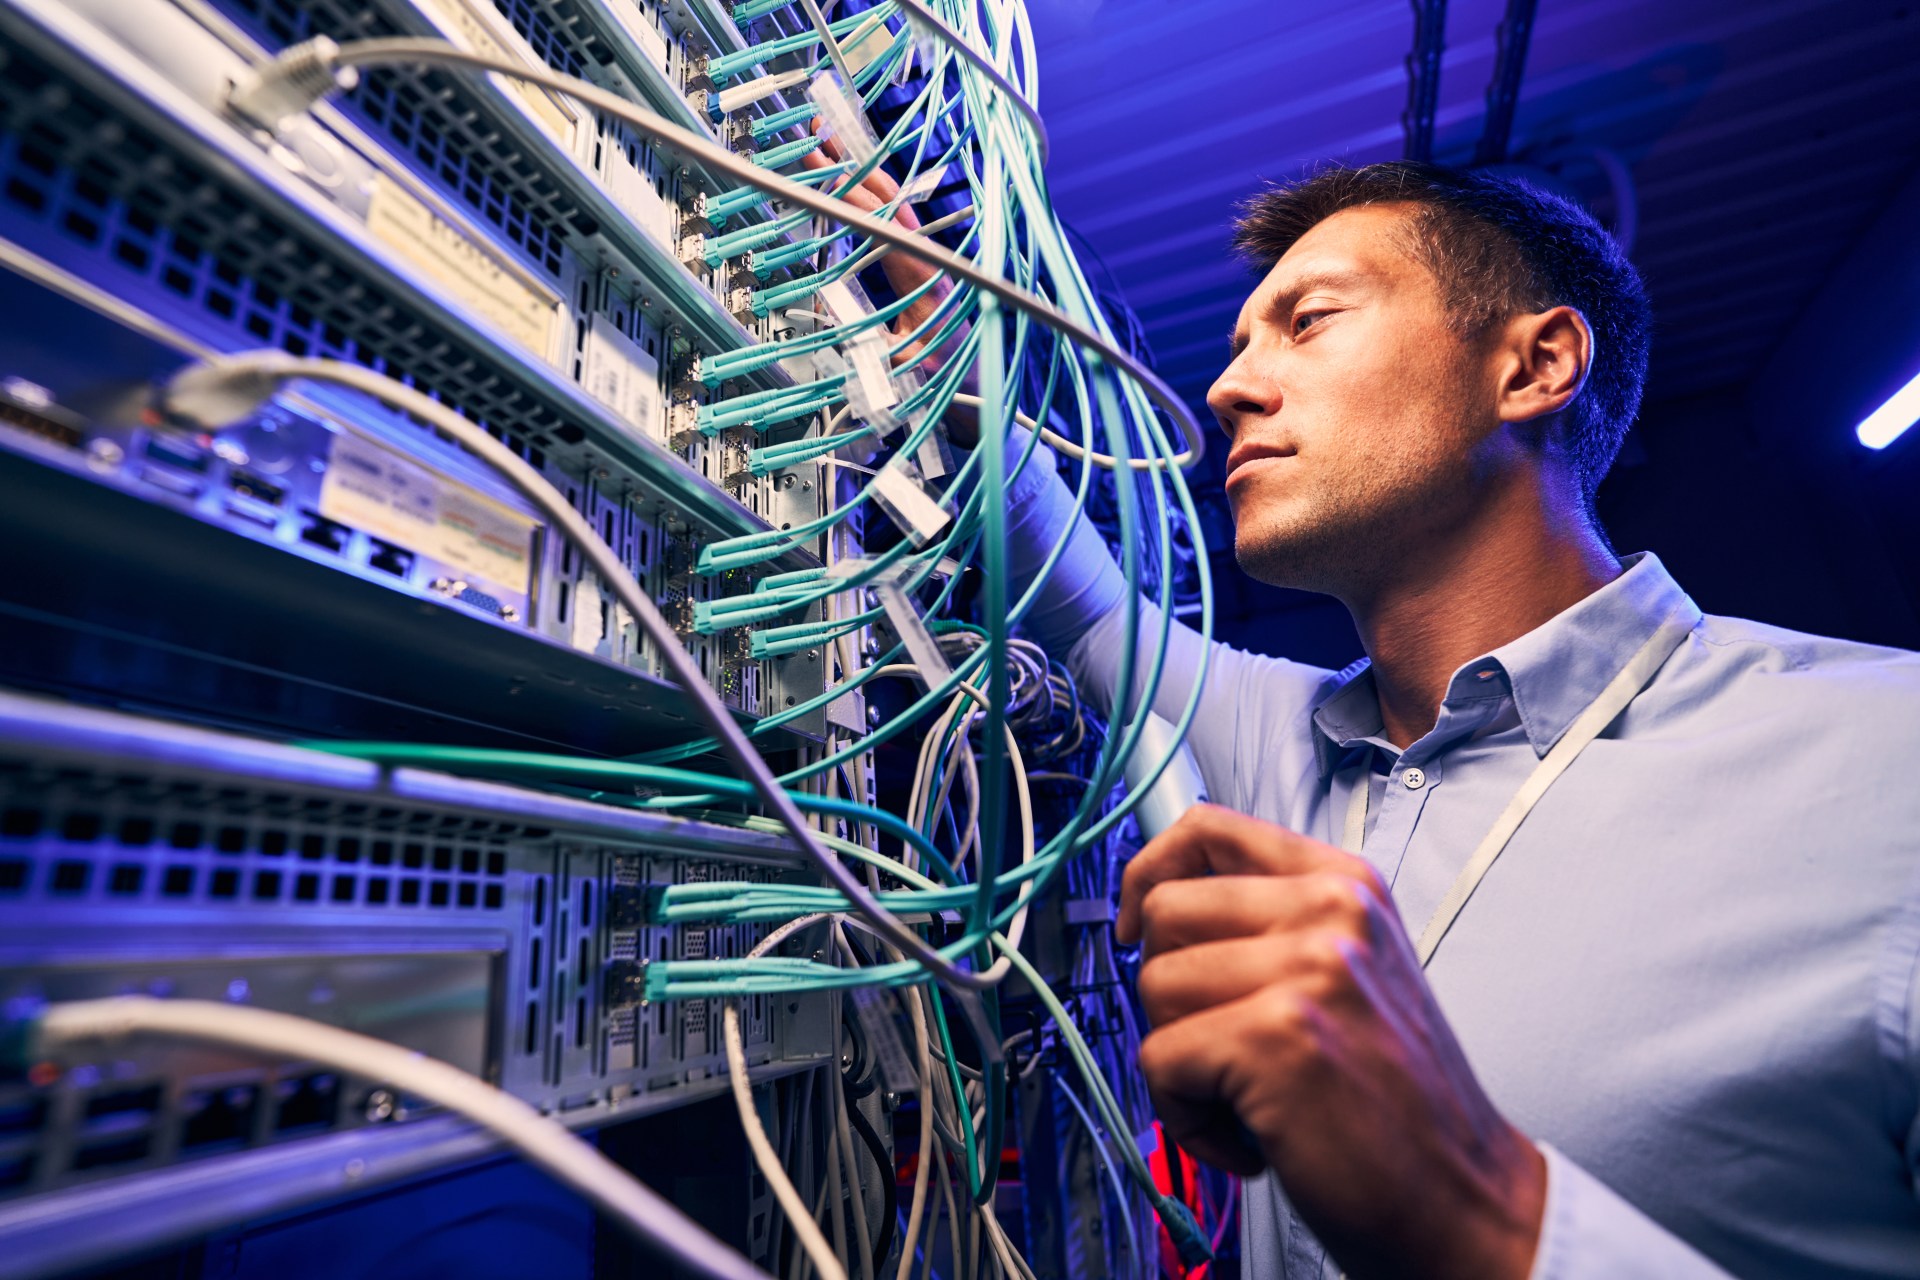 What Do You Need to Consider When Setting up Interconnection Systems? Key Factors